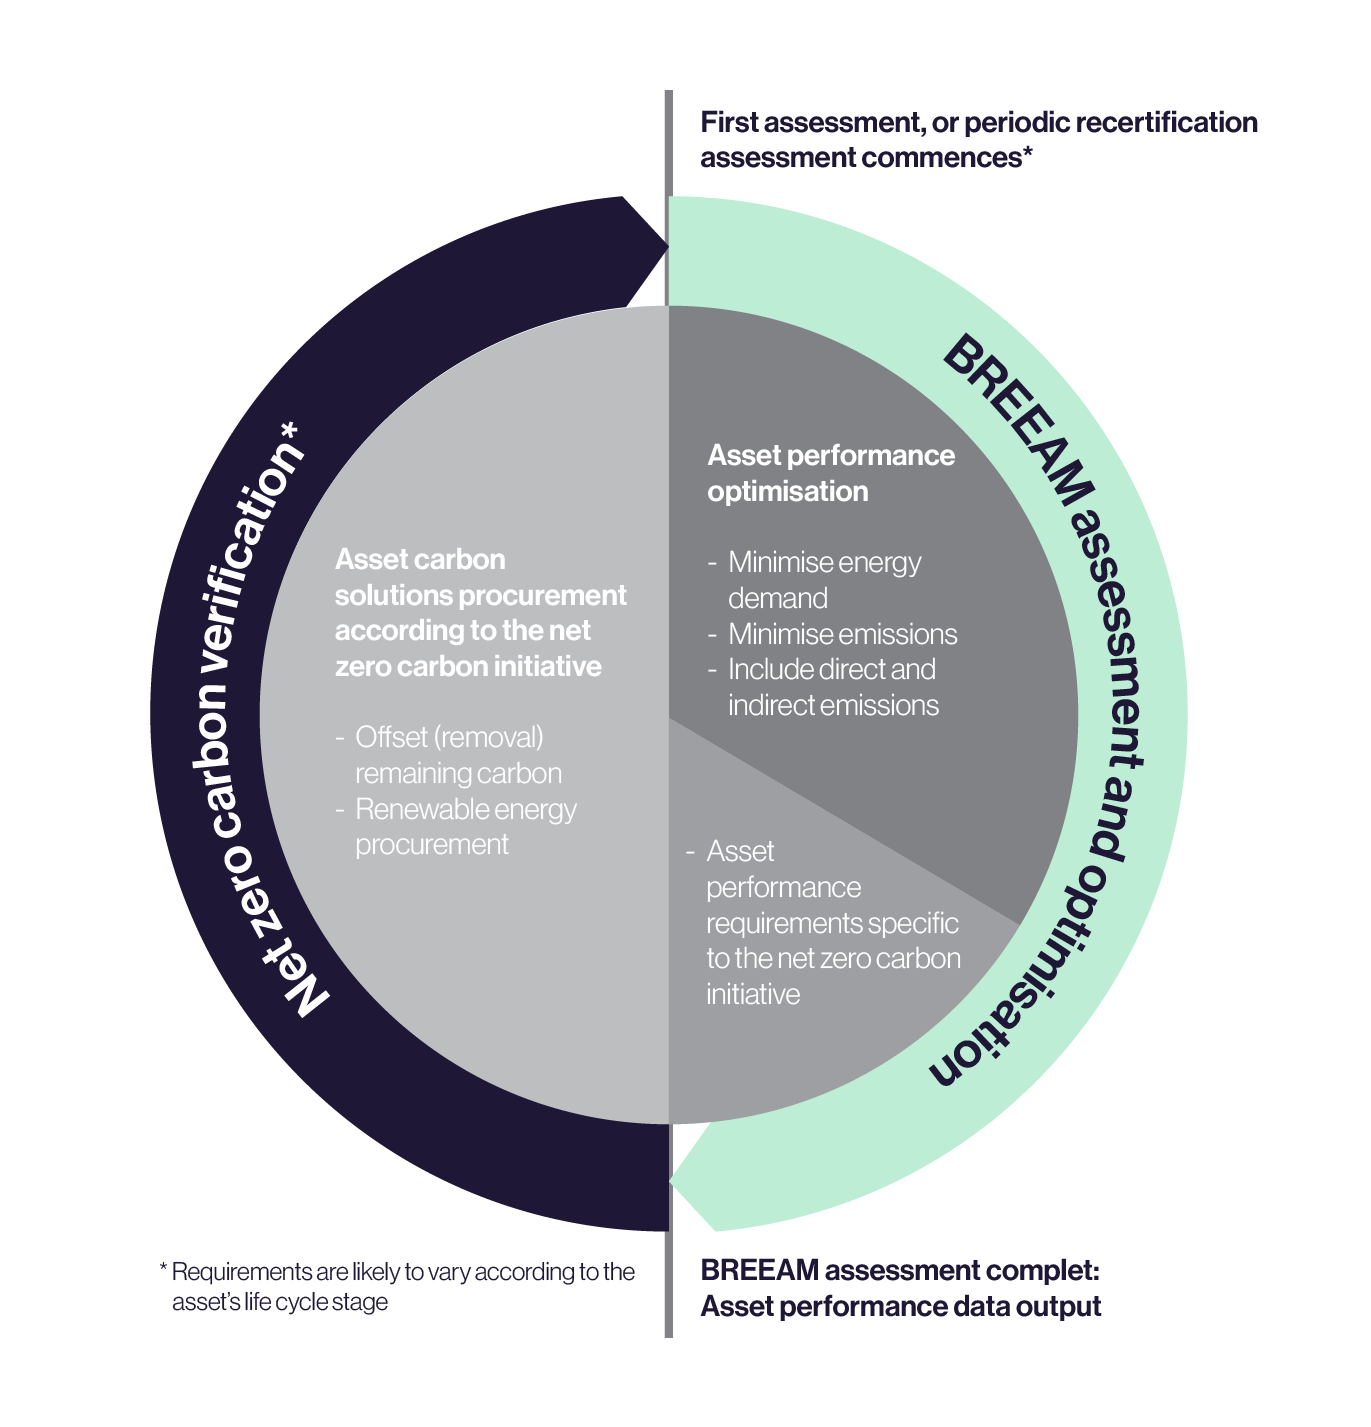 Circular diagram of how the BREEAM Assessment relates to net zero carbon buildings and assets